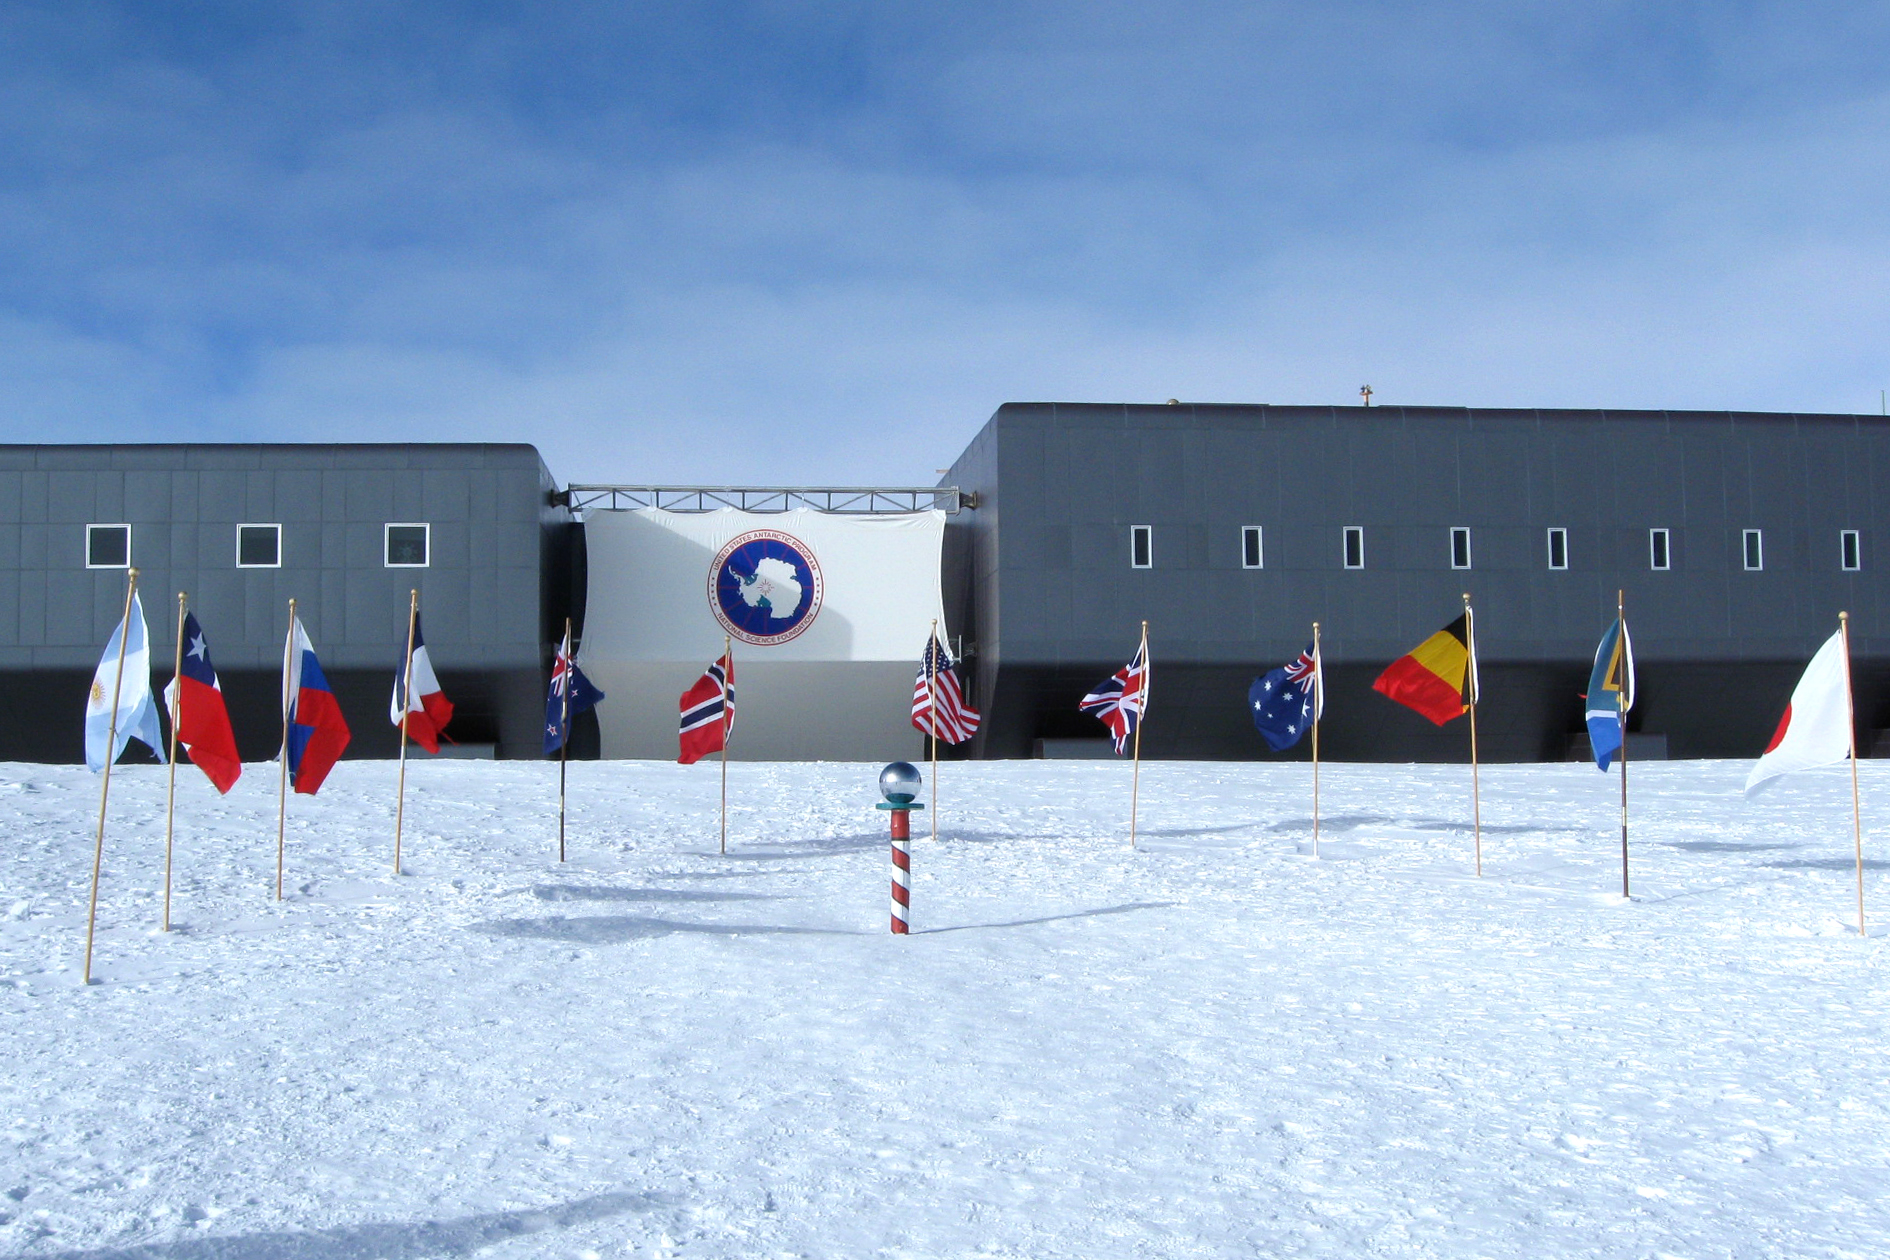 A building on snow with flags out front.